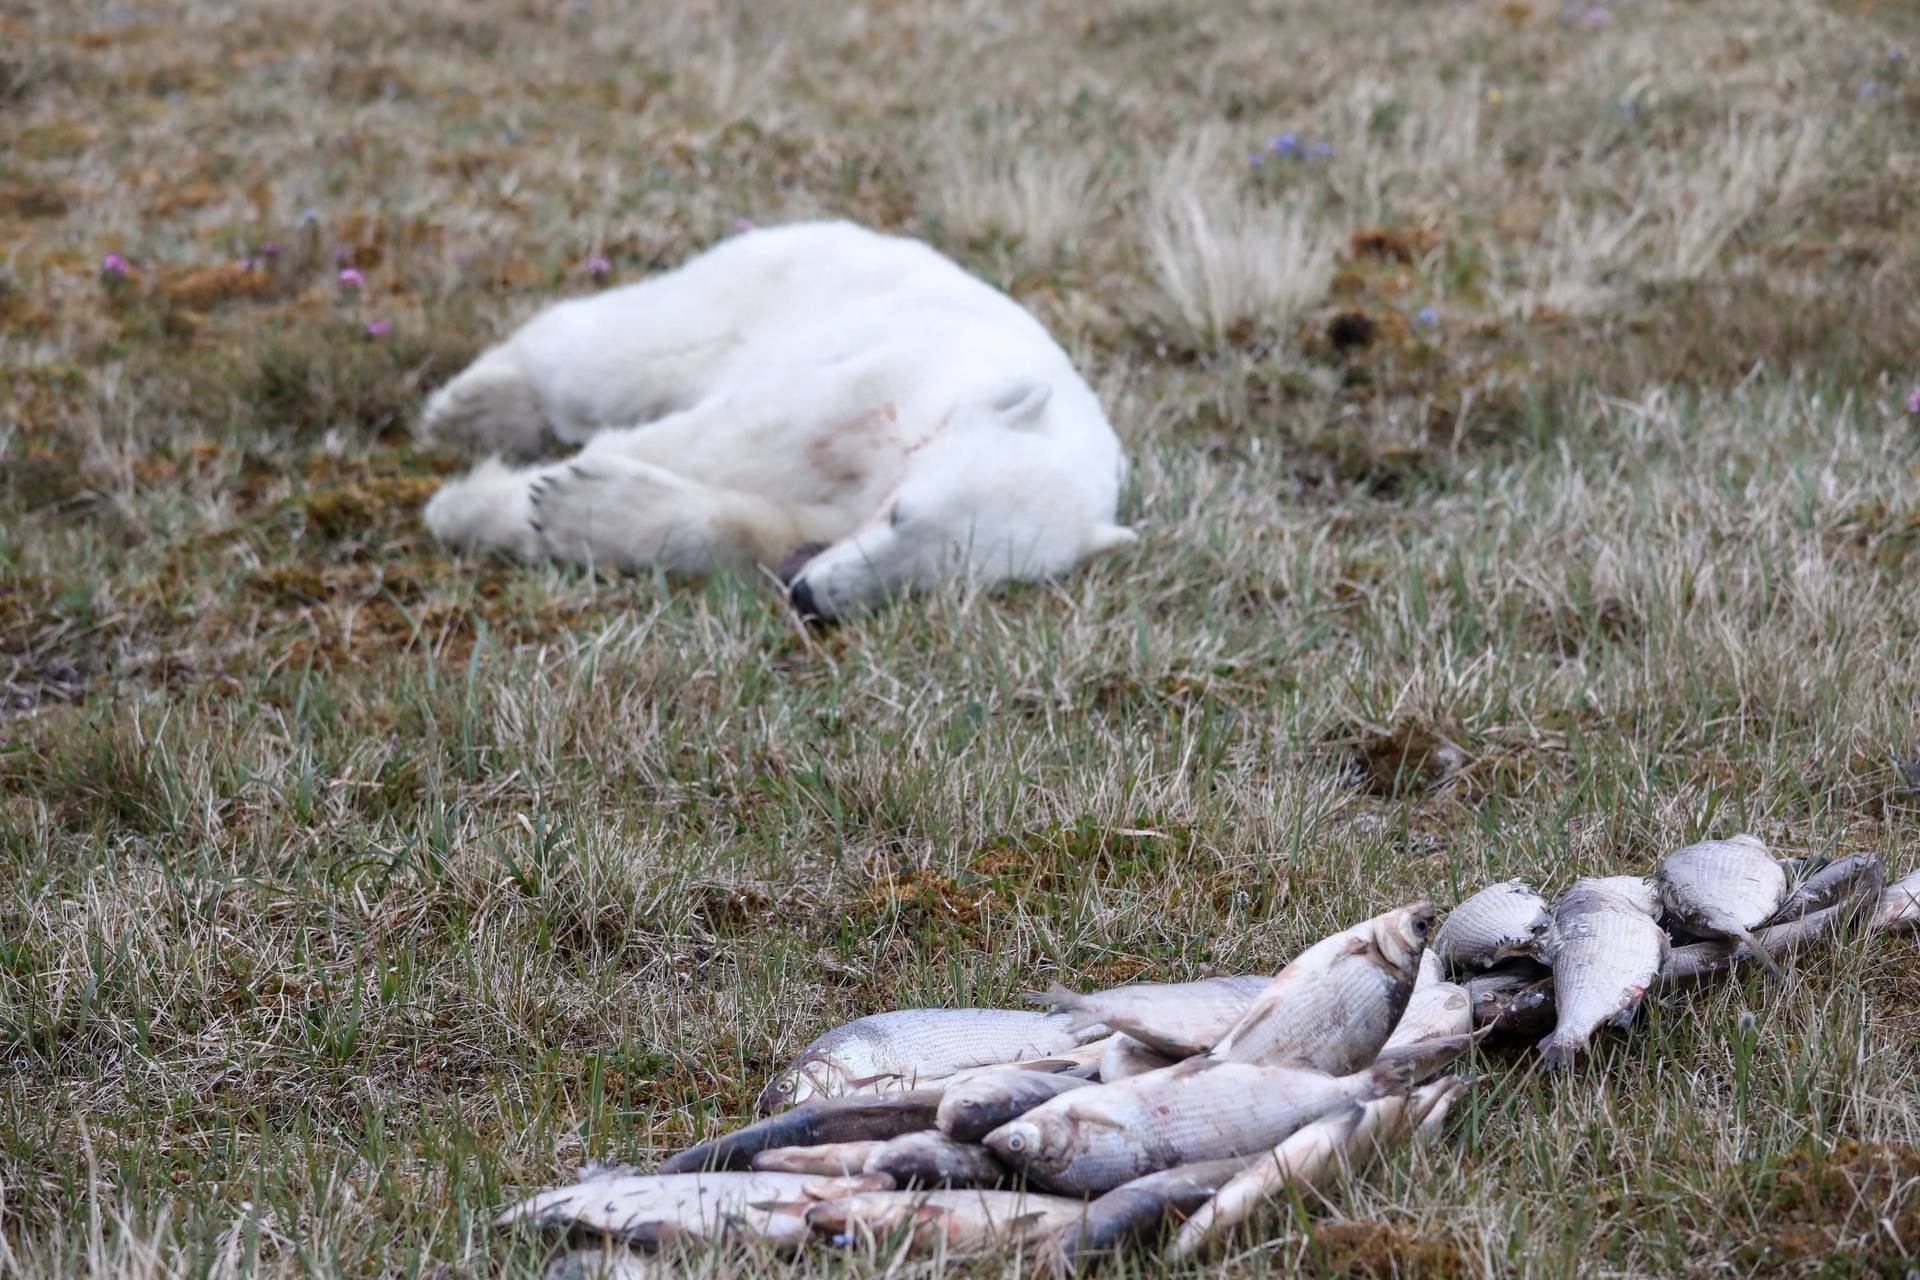 A sedated female polar bear lays on the ground after veterinarians removed a tin can stuck in its mouth in Dikson